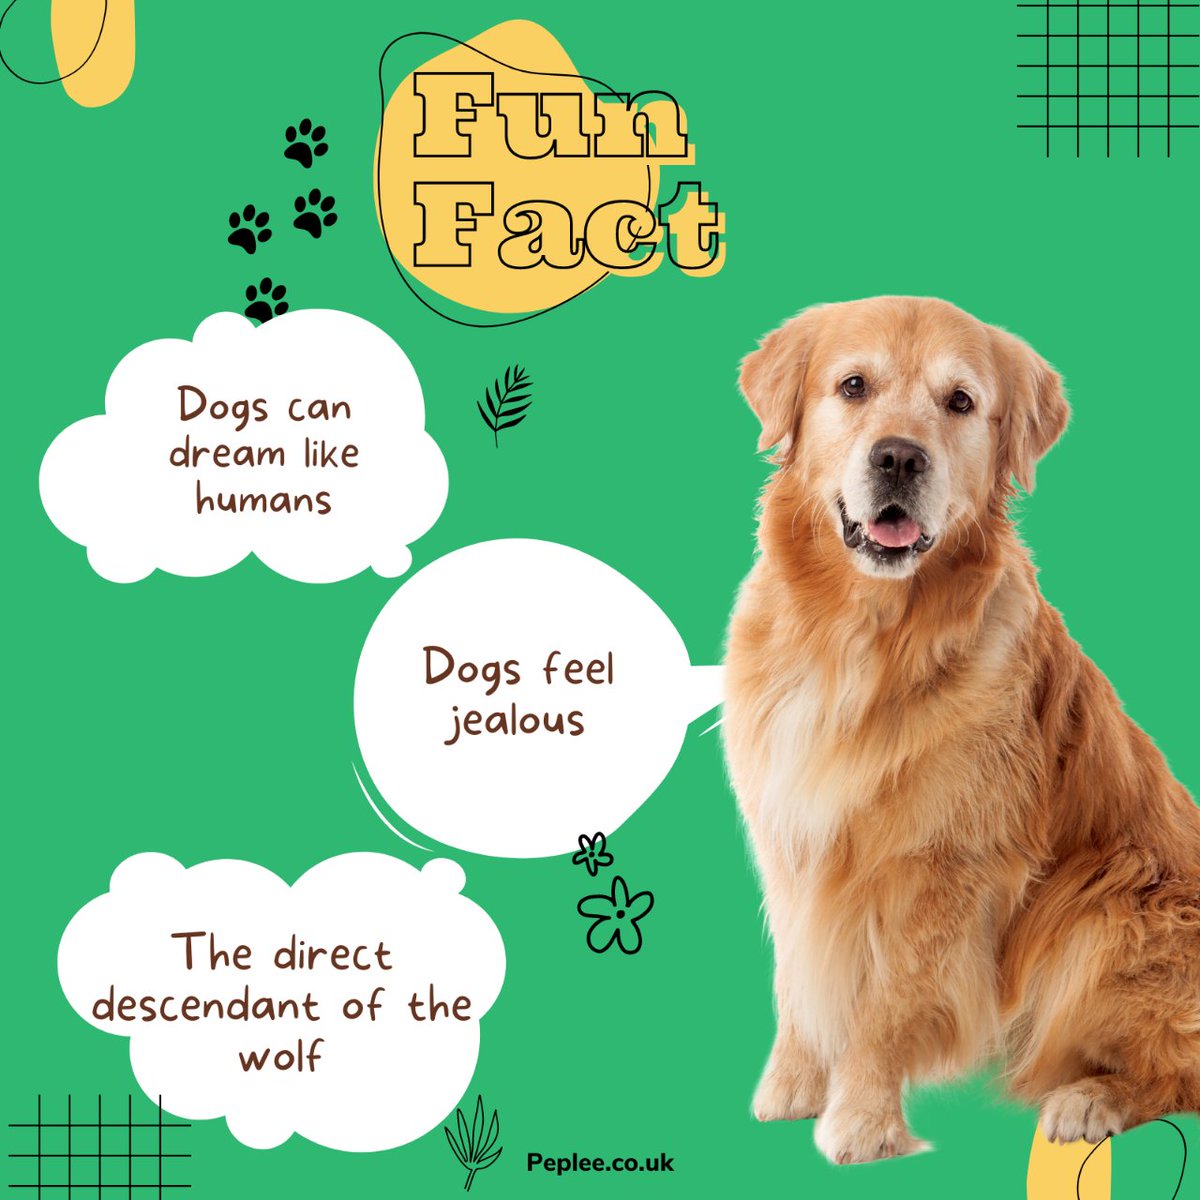 Fun Fact: Did you know dogs can dream like humans? 😮💭 They also feel jealousy and are direct descendants of the wolf! 🌟 
#peplee #petcare #cutepets #petwellness #fatcs #petservices  #Dogdreams #Jealousdogs #Wolfdescendant #Mindblown #dogsfacts